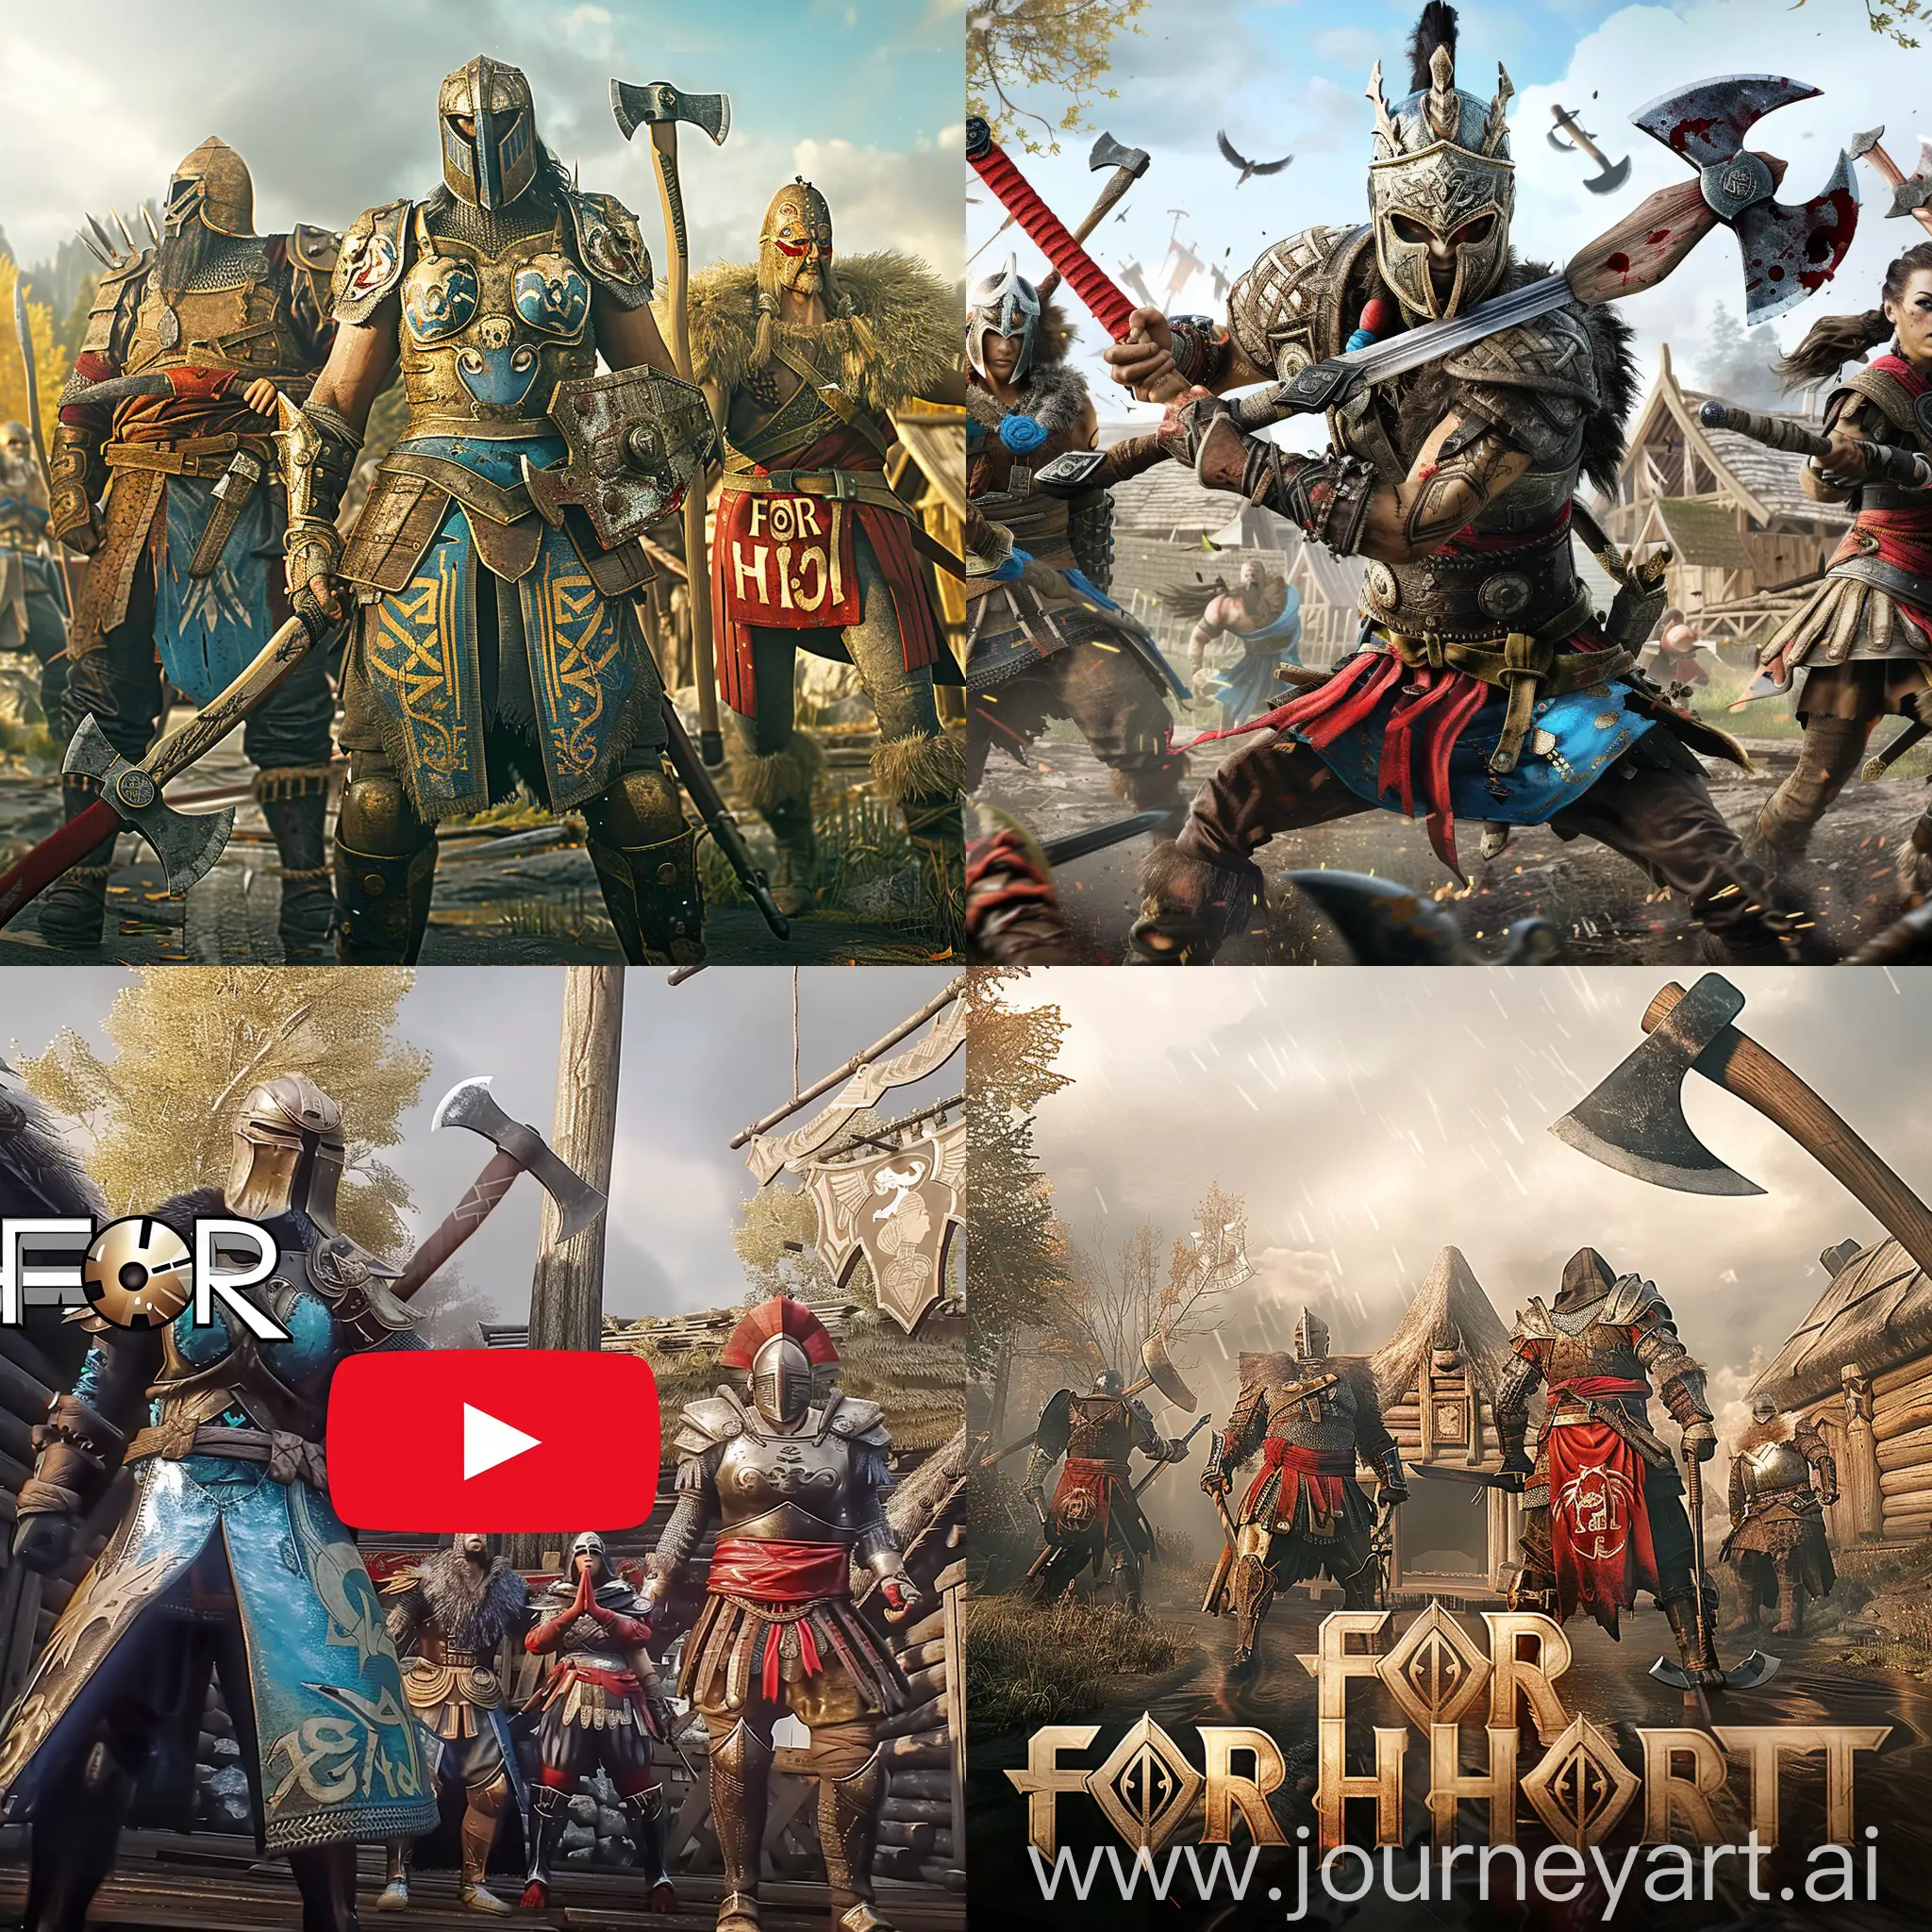 create a preview image for a YouTube video. It should have the characters of the video game FOR HONOR and the elements of video editing, the background is a wooden village, axes, swords